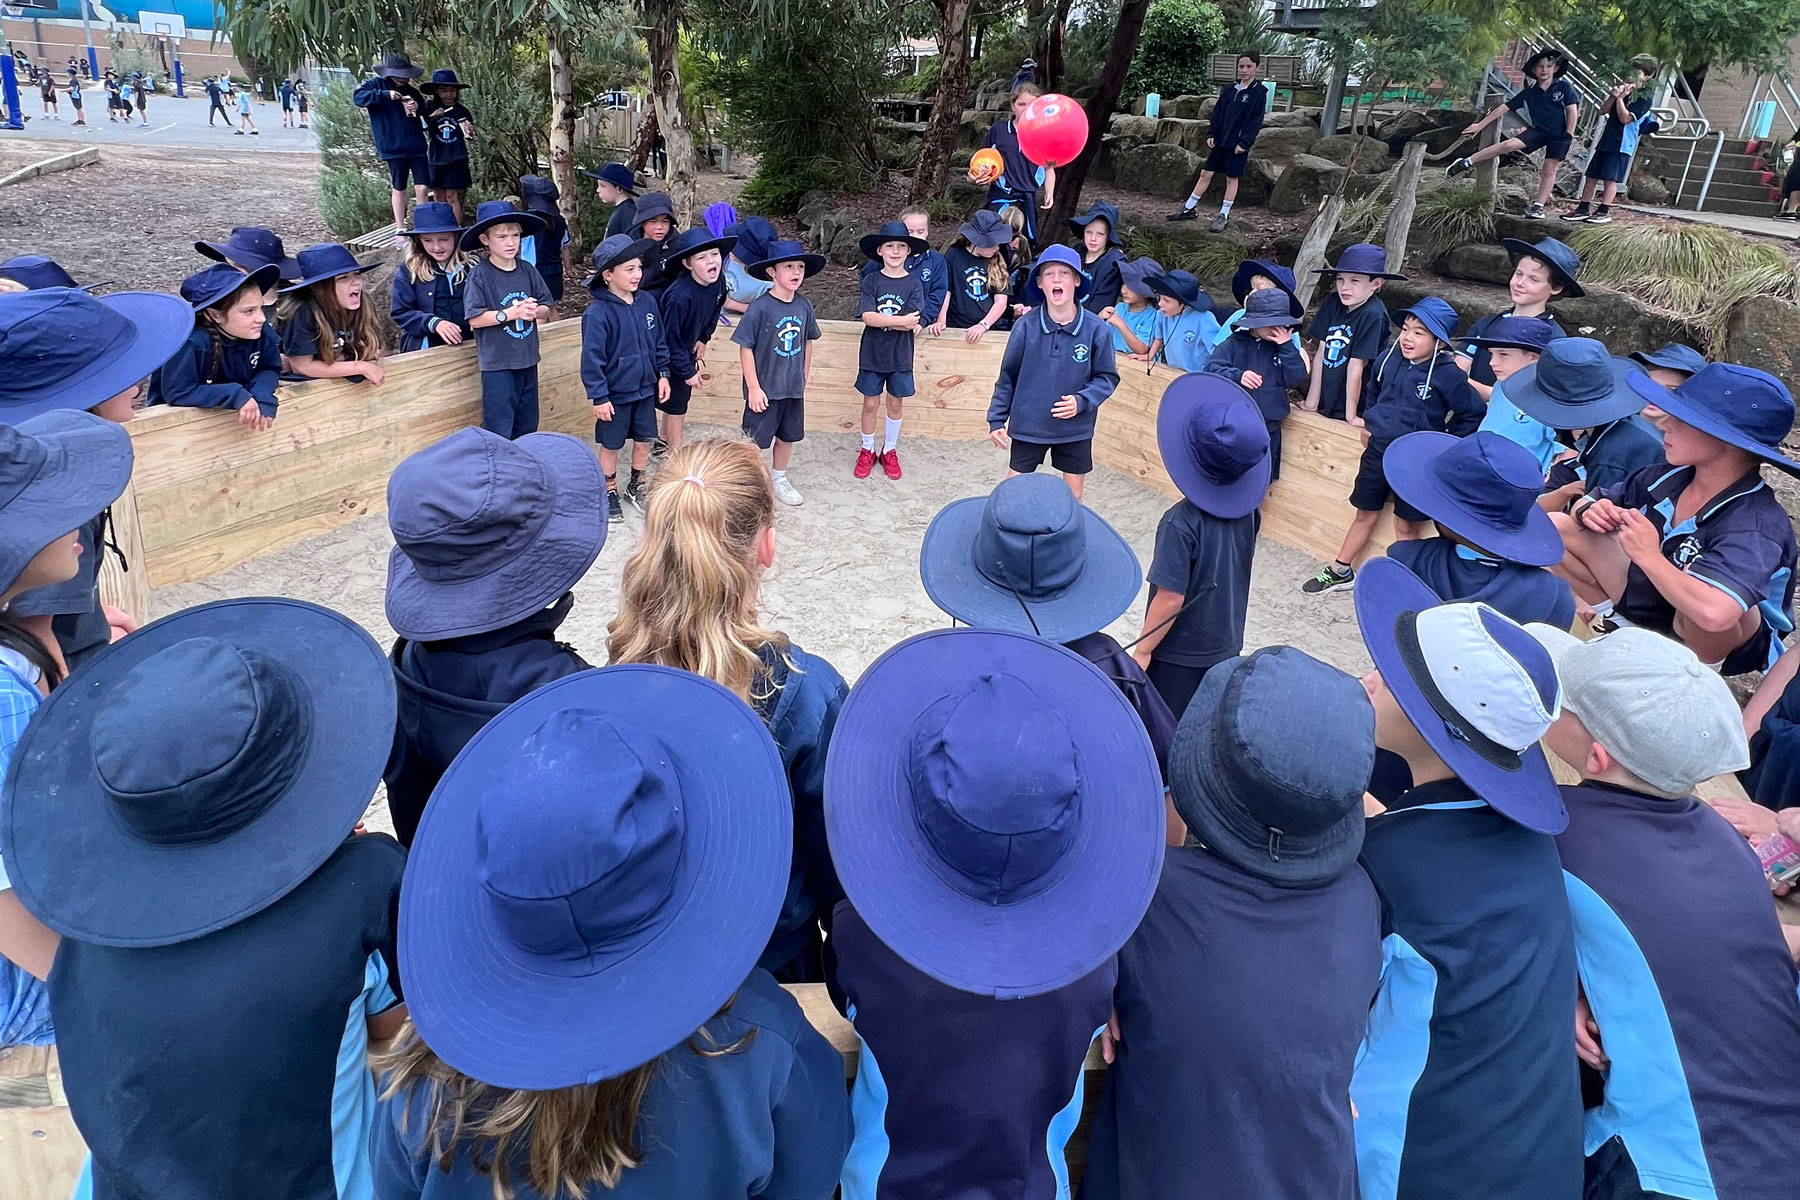 gaga ball pits at ivanhoe east primary school